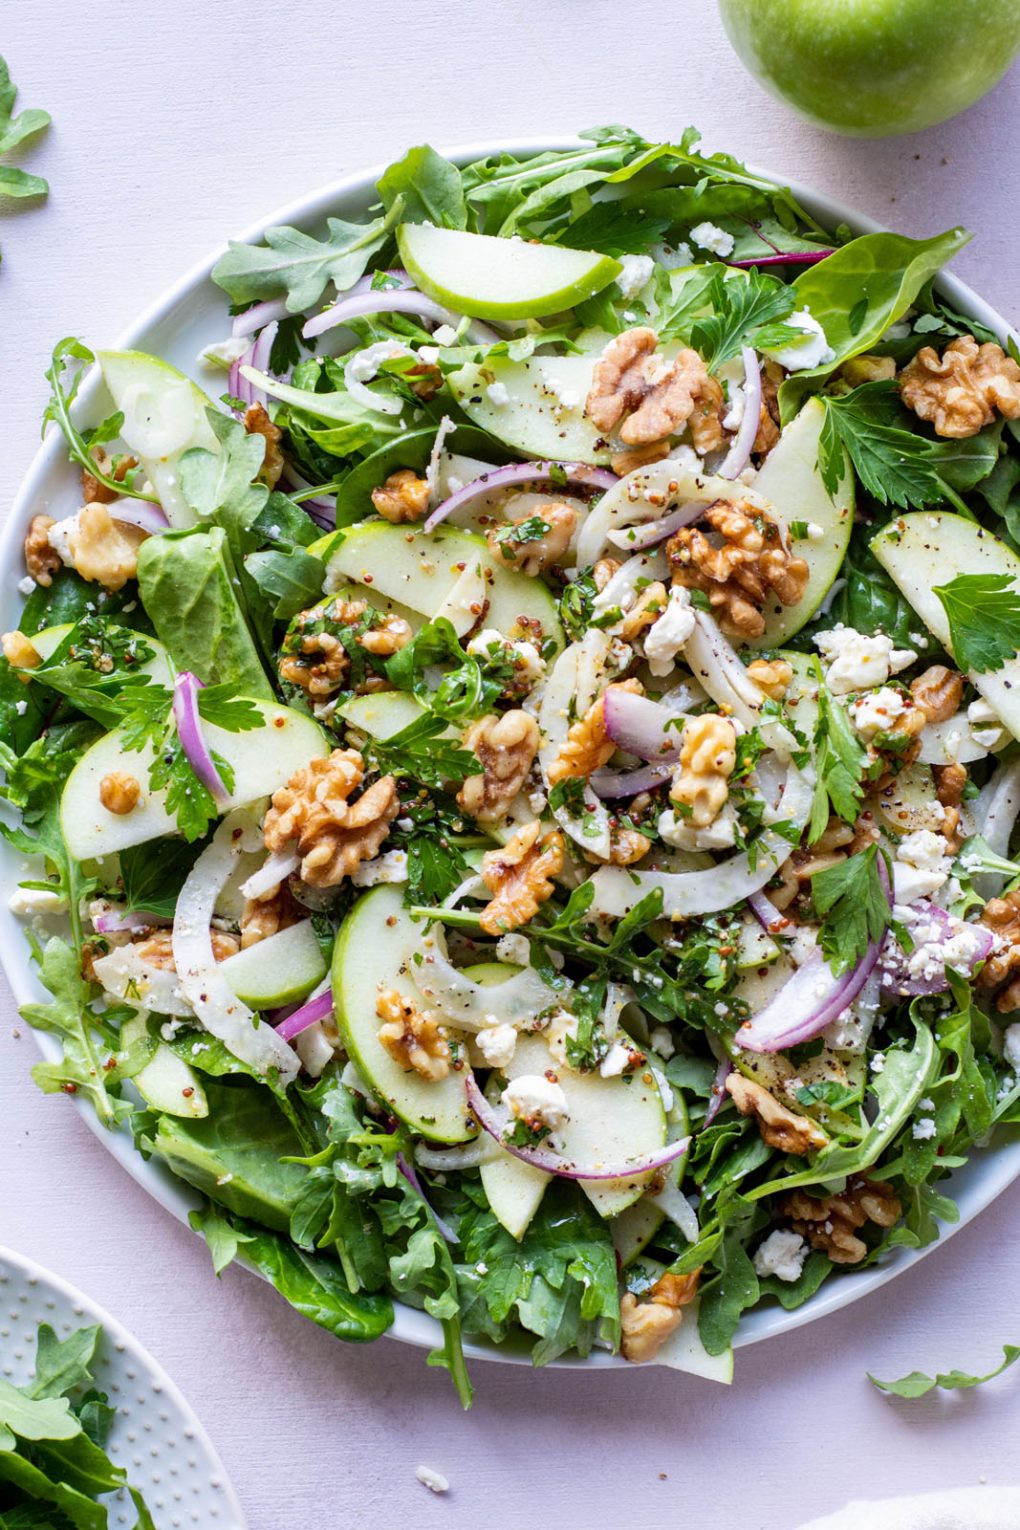 Large green salad on a round plate and a light colored background. Salad greens layered with thinly sliced green onion, thinly shaved fresh fennel, sliced red onion, walnuts, and torn parsley leaves. Drizzled with a mustardy dressing.